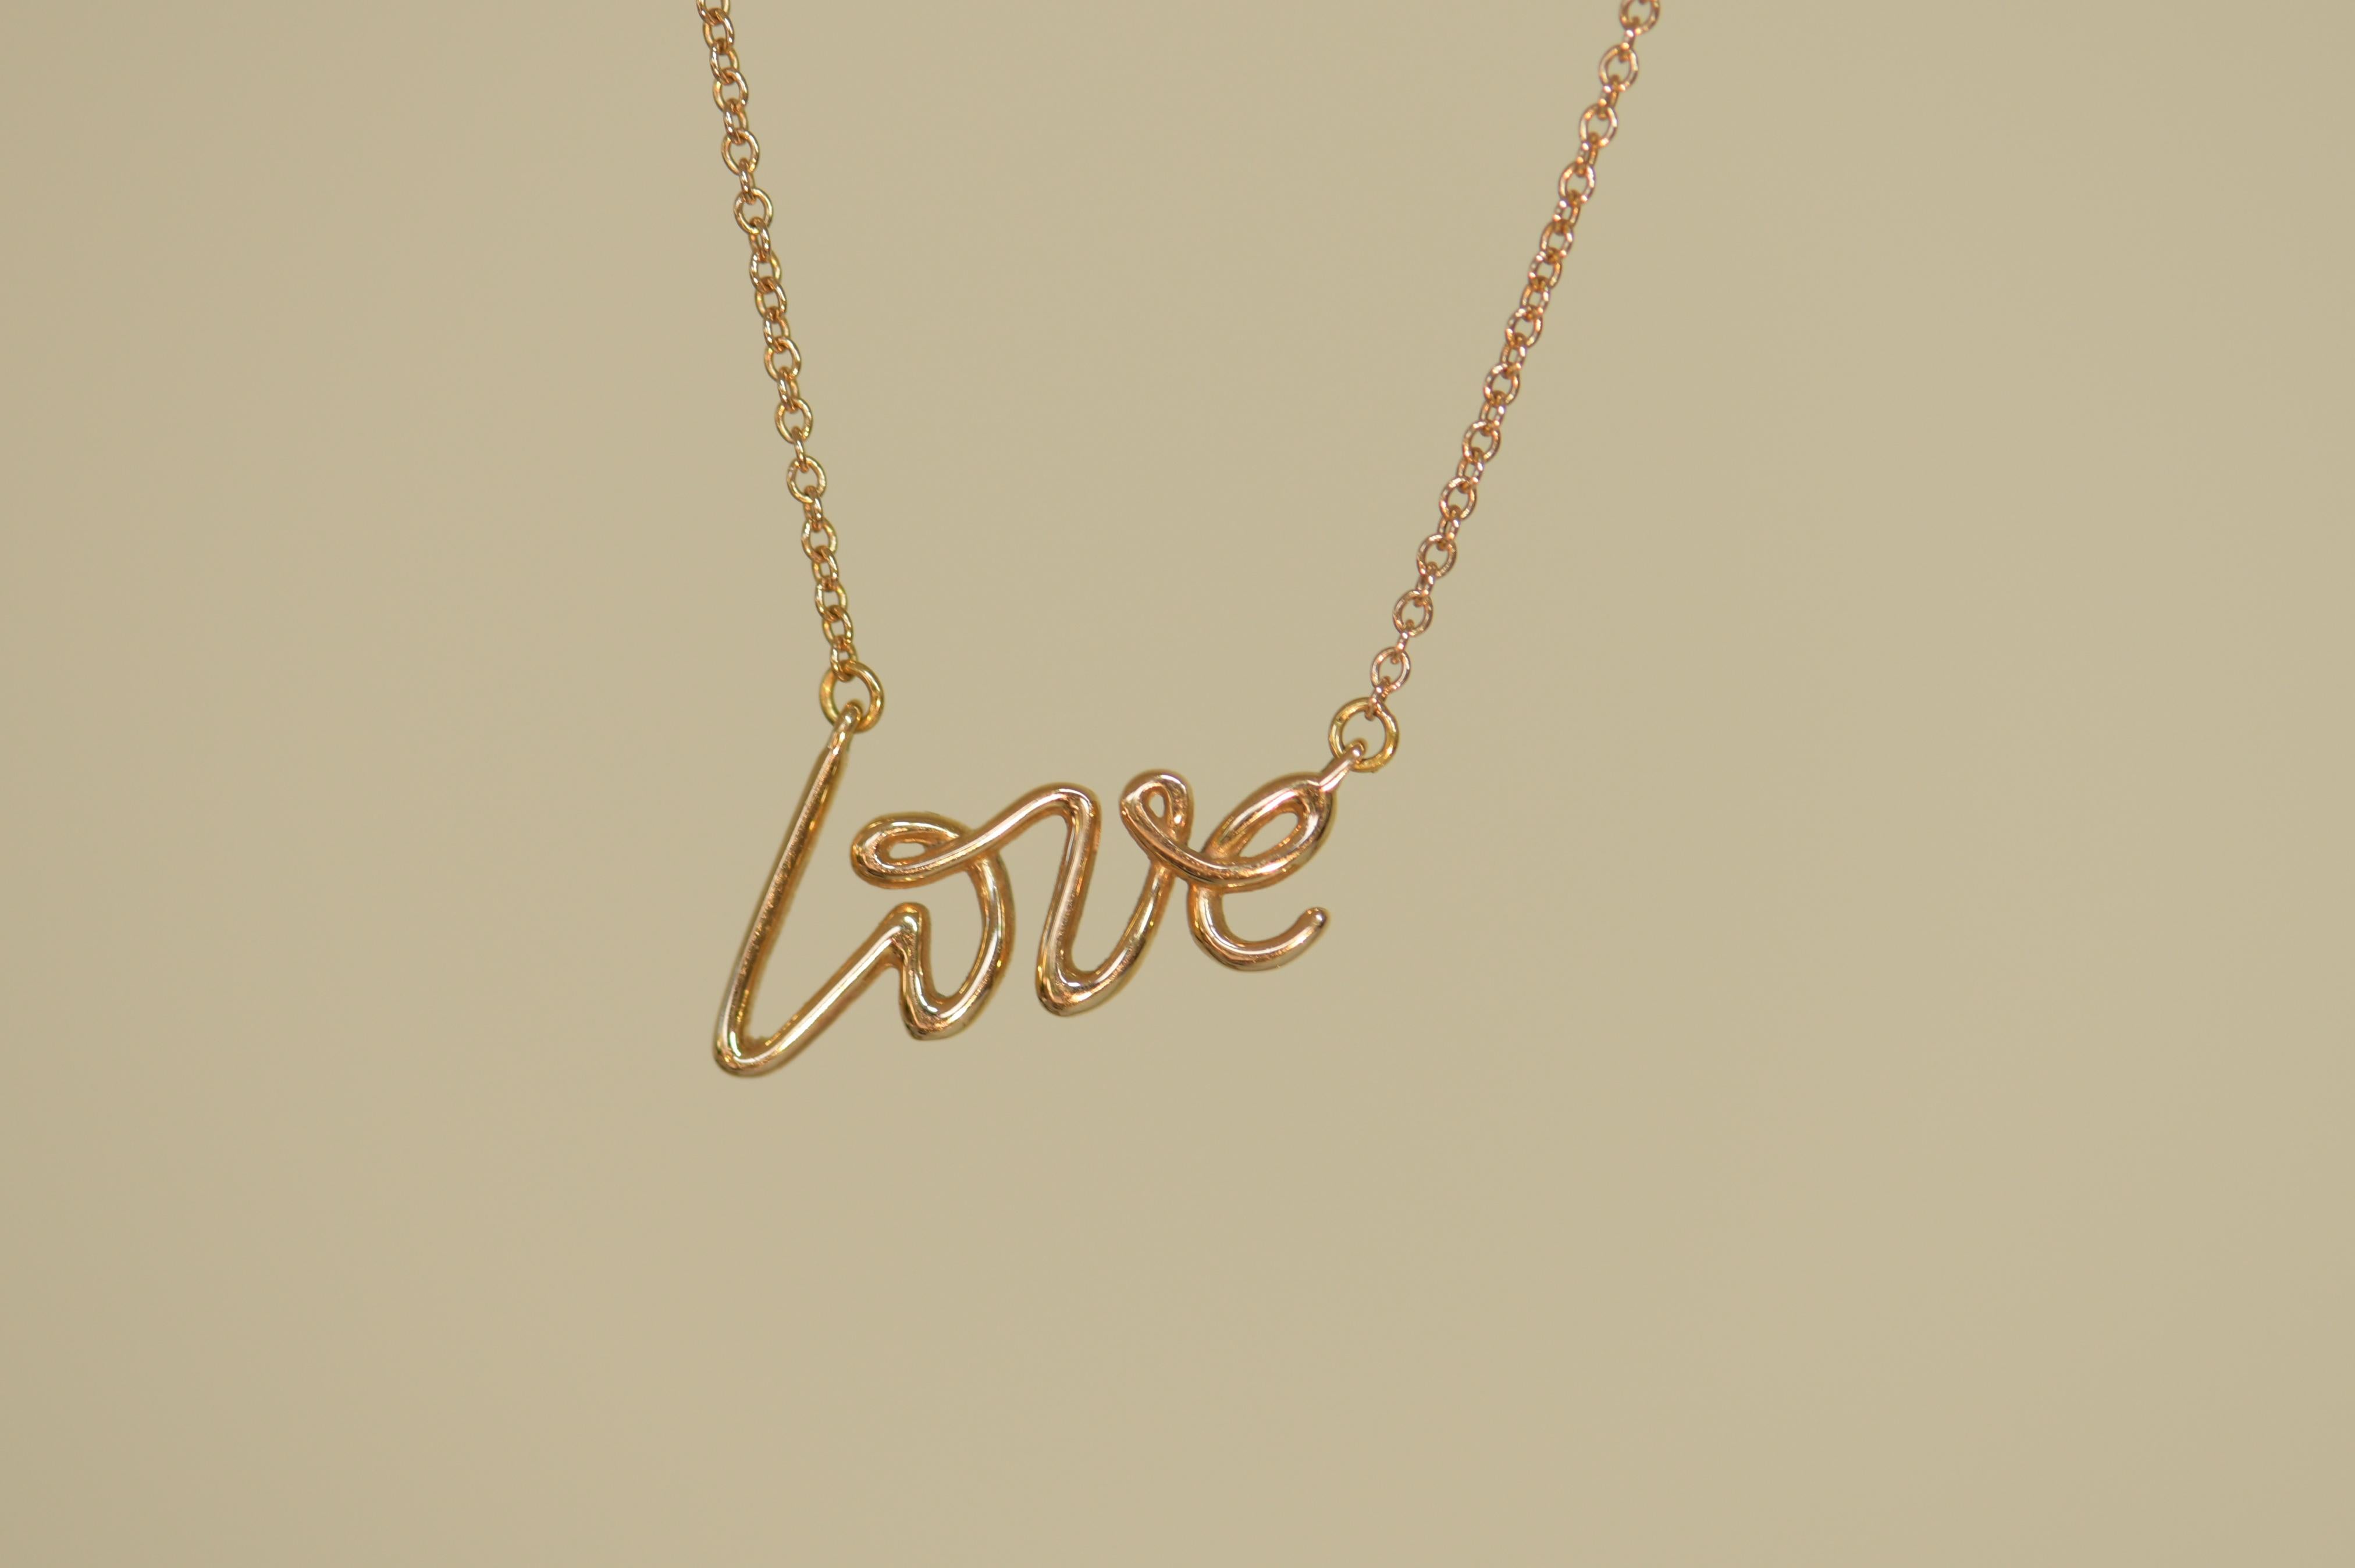 This lovely necklace featuring Paloma Picasso’s own handwriting, this expressive collection was inspired by graffiti scrawled on New York buildings. Simple and elegant, this pendant is a perfect finishing touch to any ensemble.

It would be a lovely